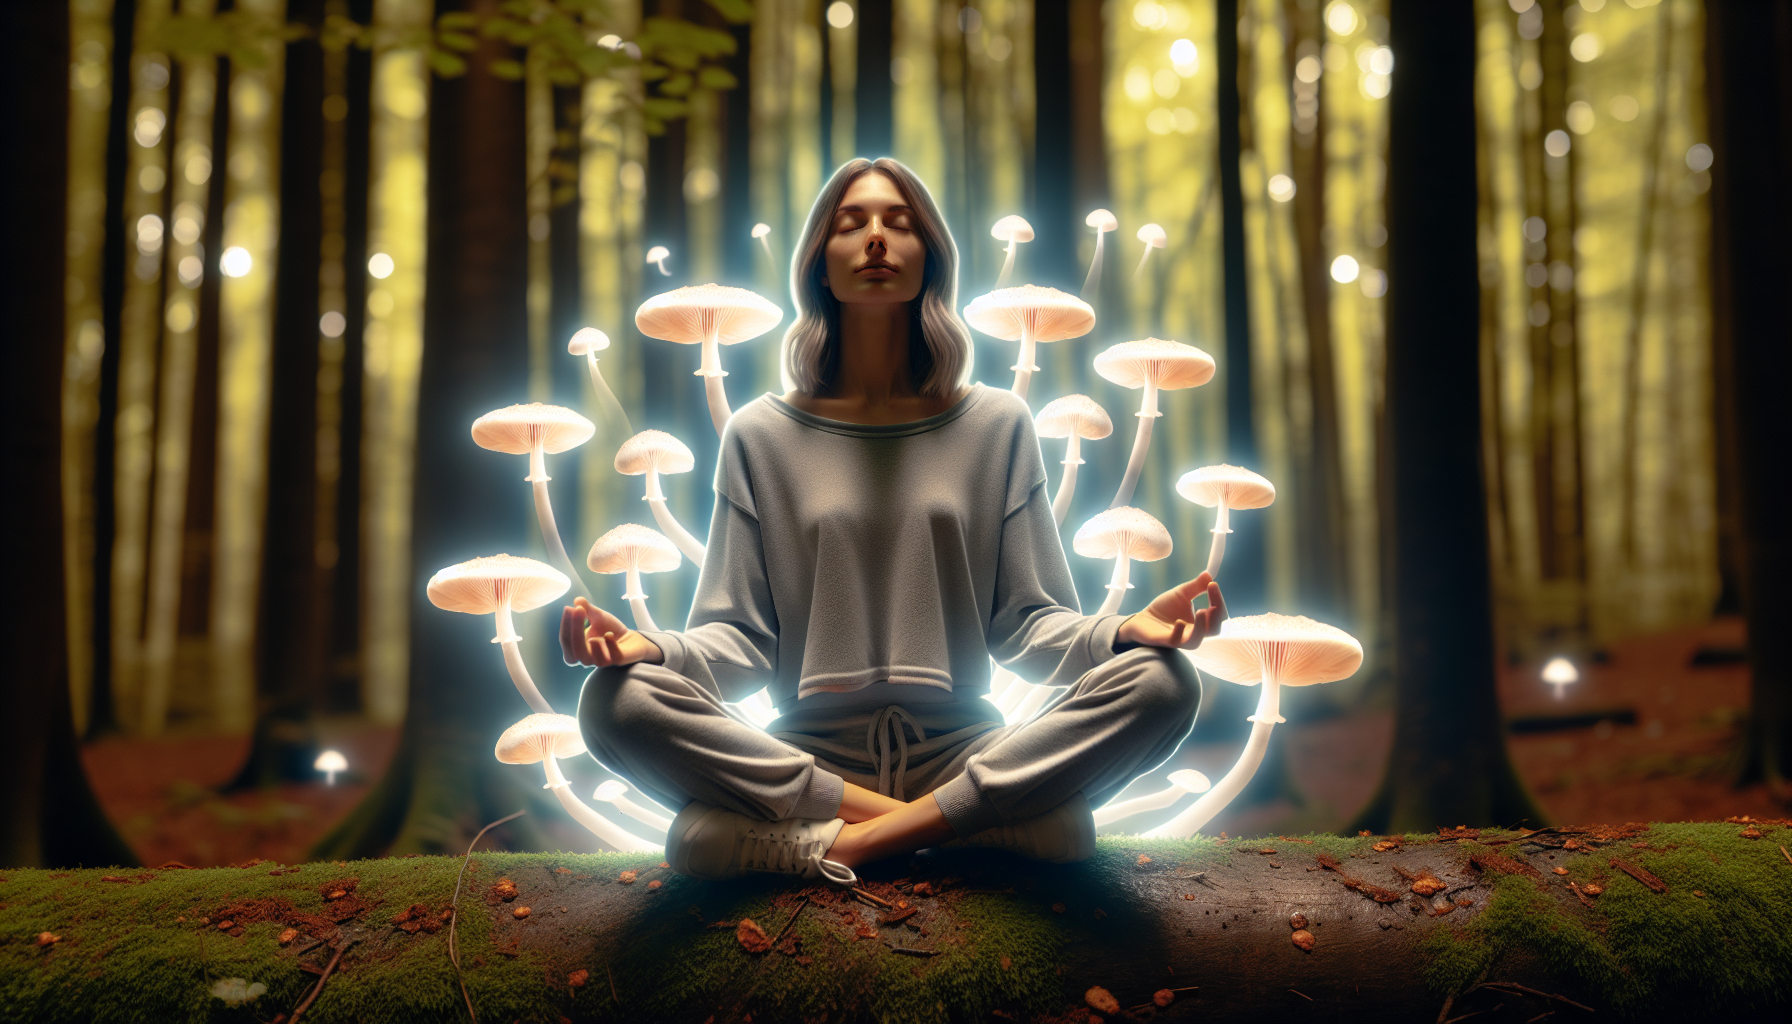 Illustration of person experiencing therapeutic benefits of psilocybin use